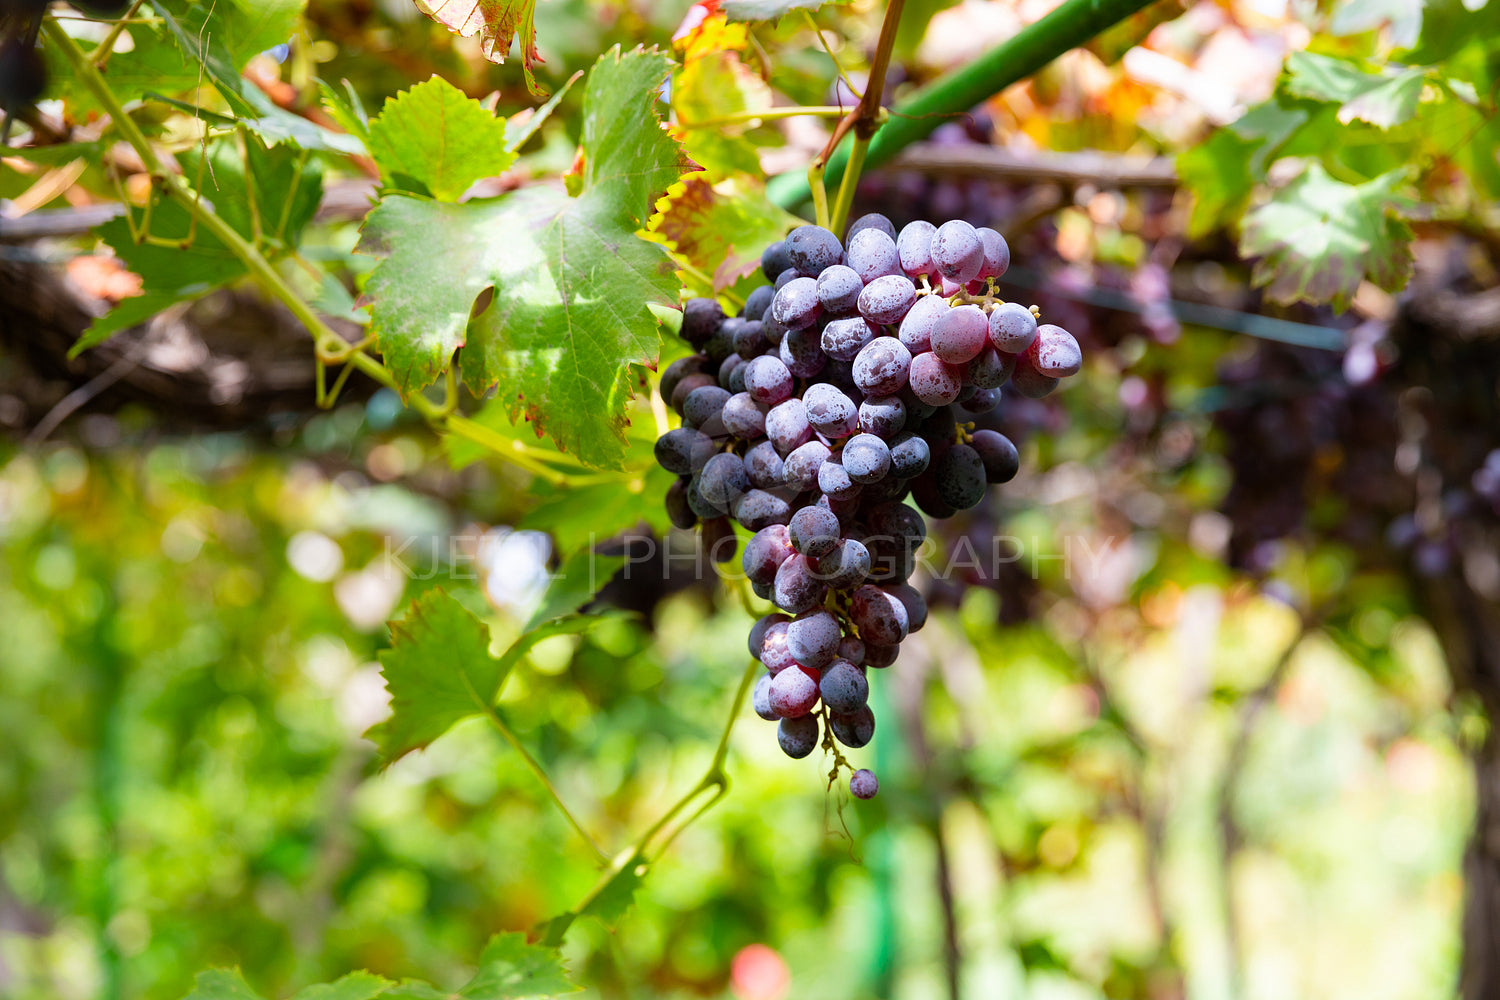 Organic Bunches of Grapes for Wine Production Growing At Vineyard